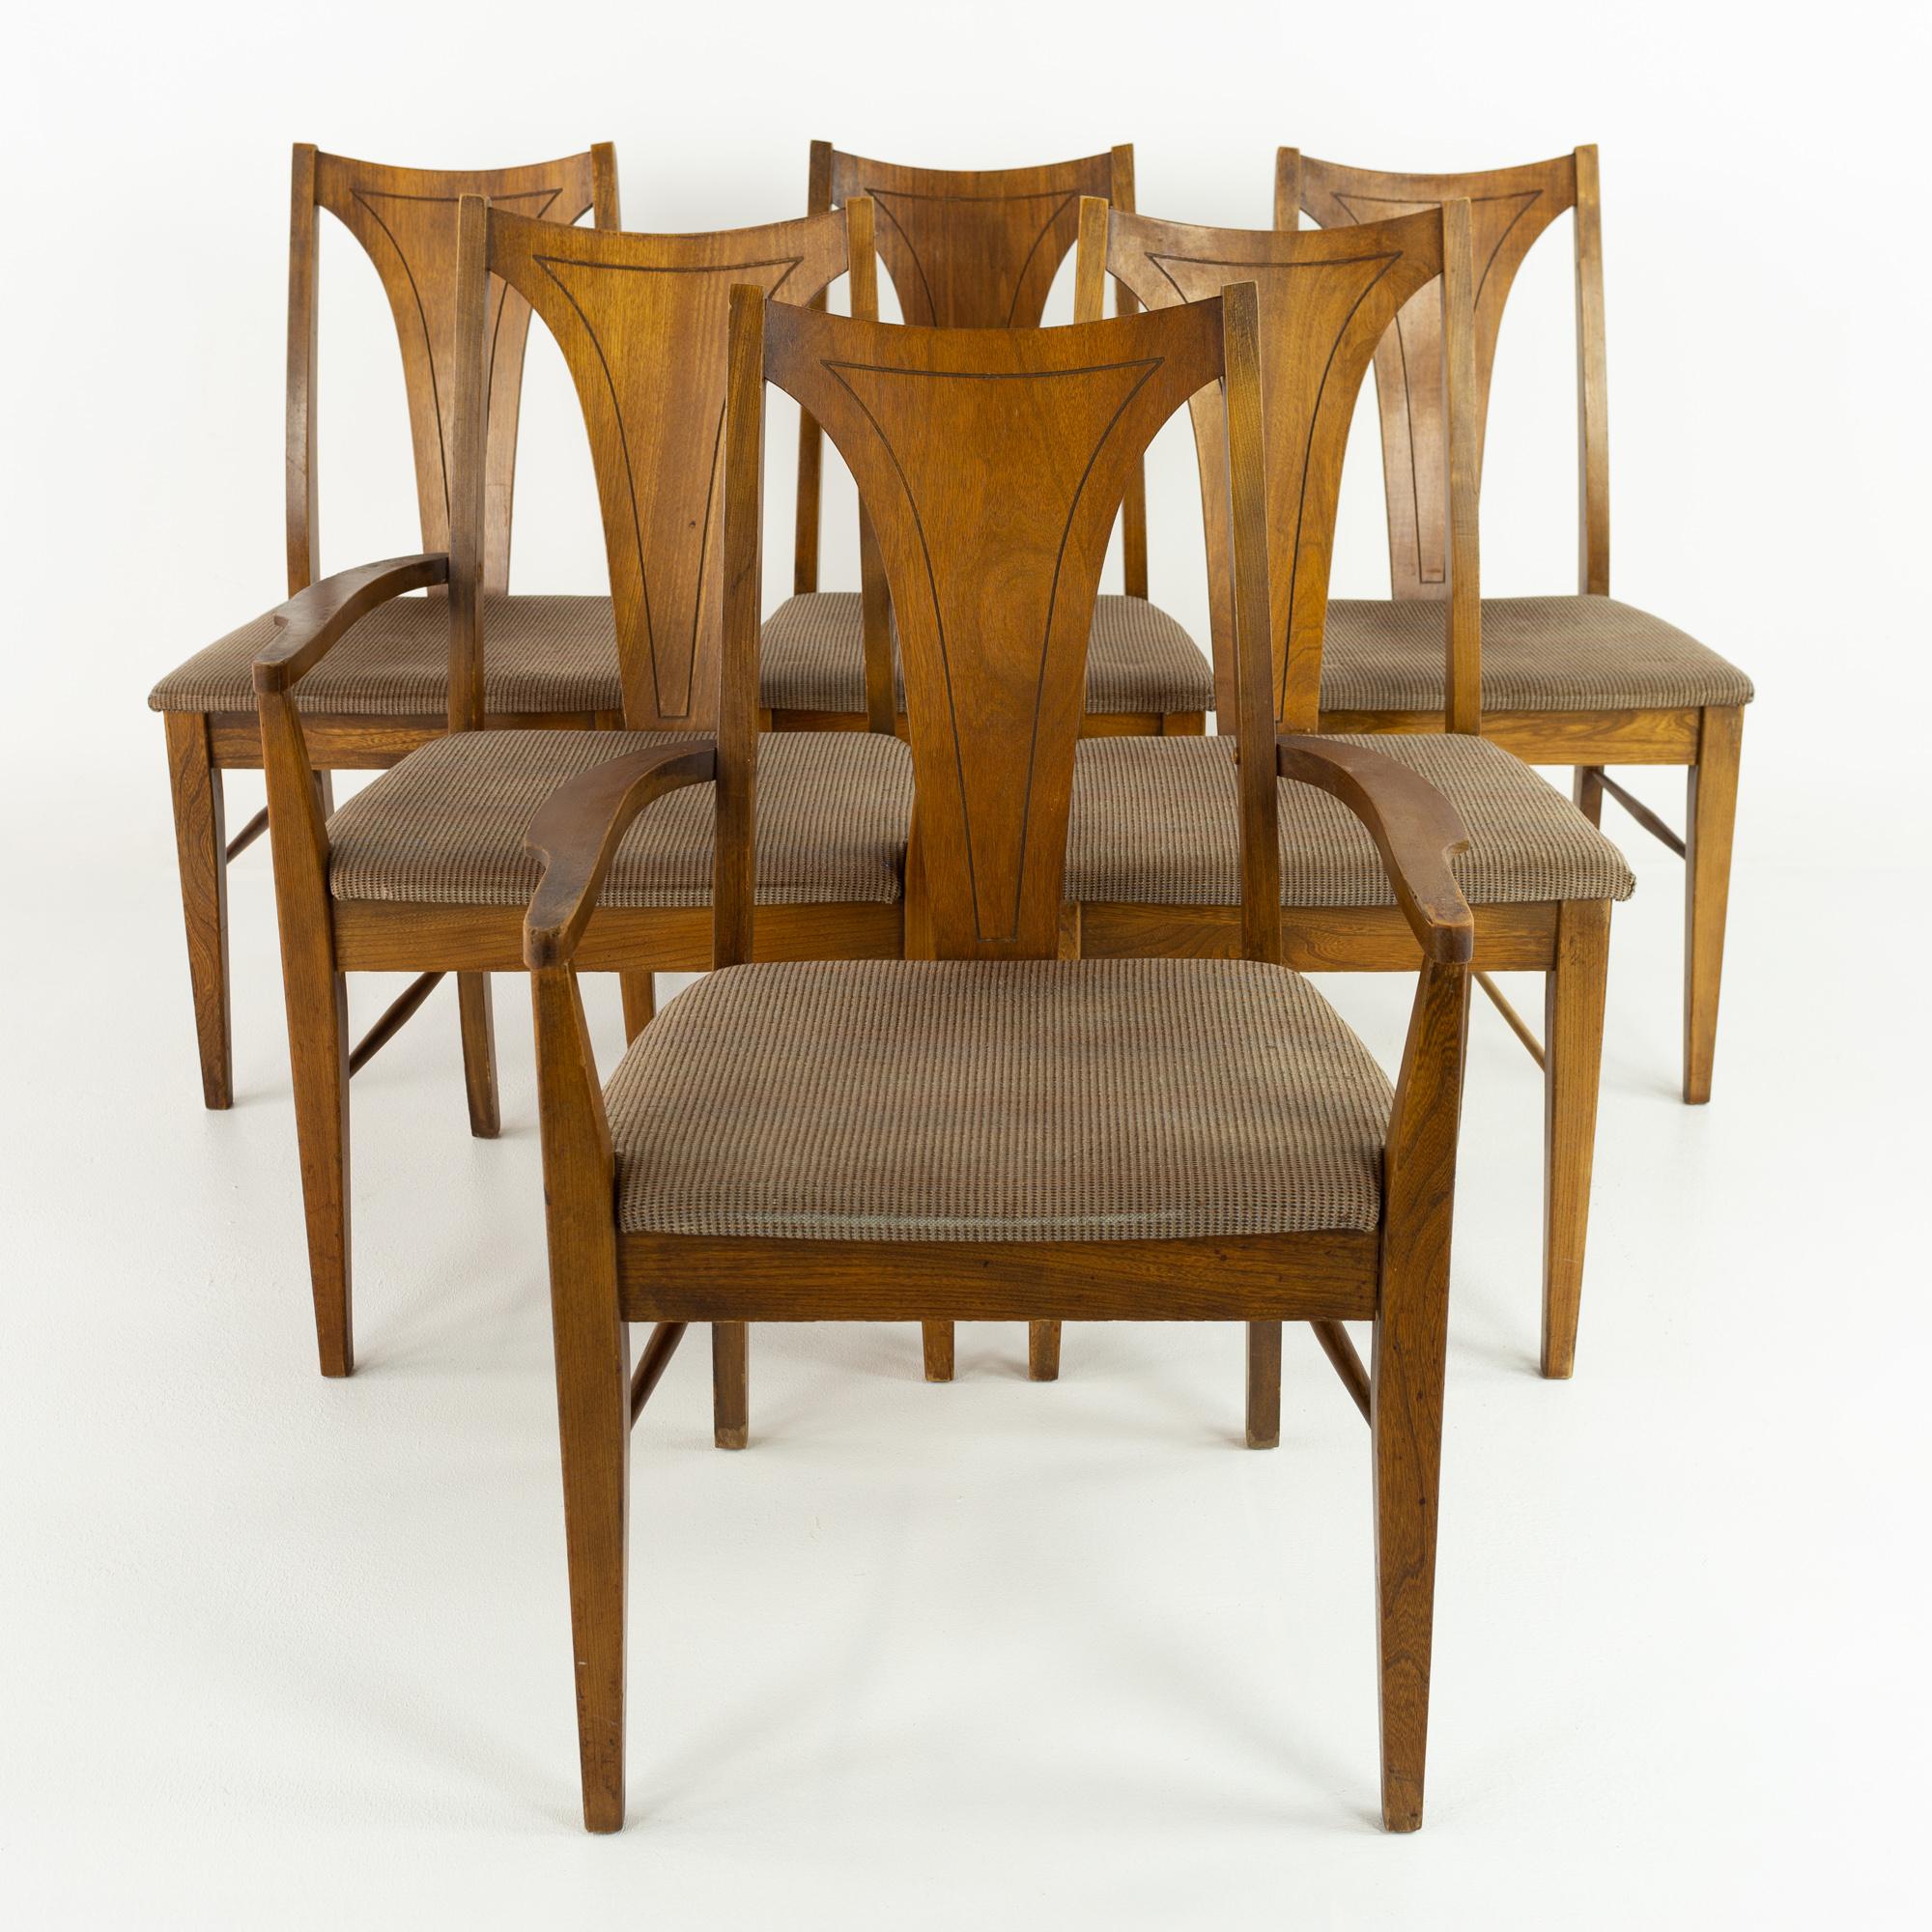 Kent Coffey perspecta mid century walnut dining chairs - Set of 6

These chairs measure: 23.75 wide x 22.5 deep x 35 inches high, with a seat height of 18 and arm height of 24.5 inches

?All pieces of furniture can be had in what we call